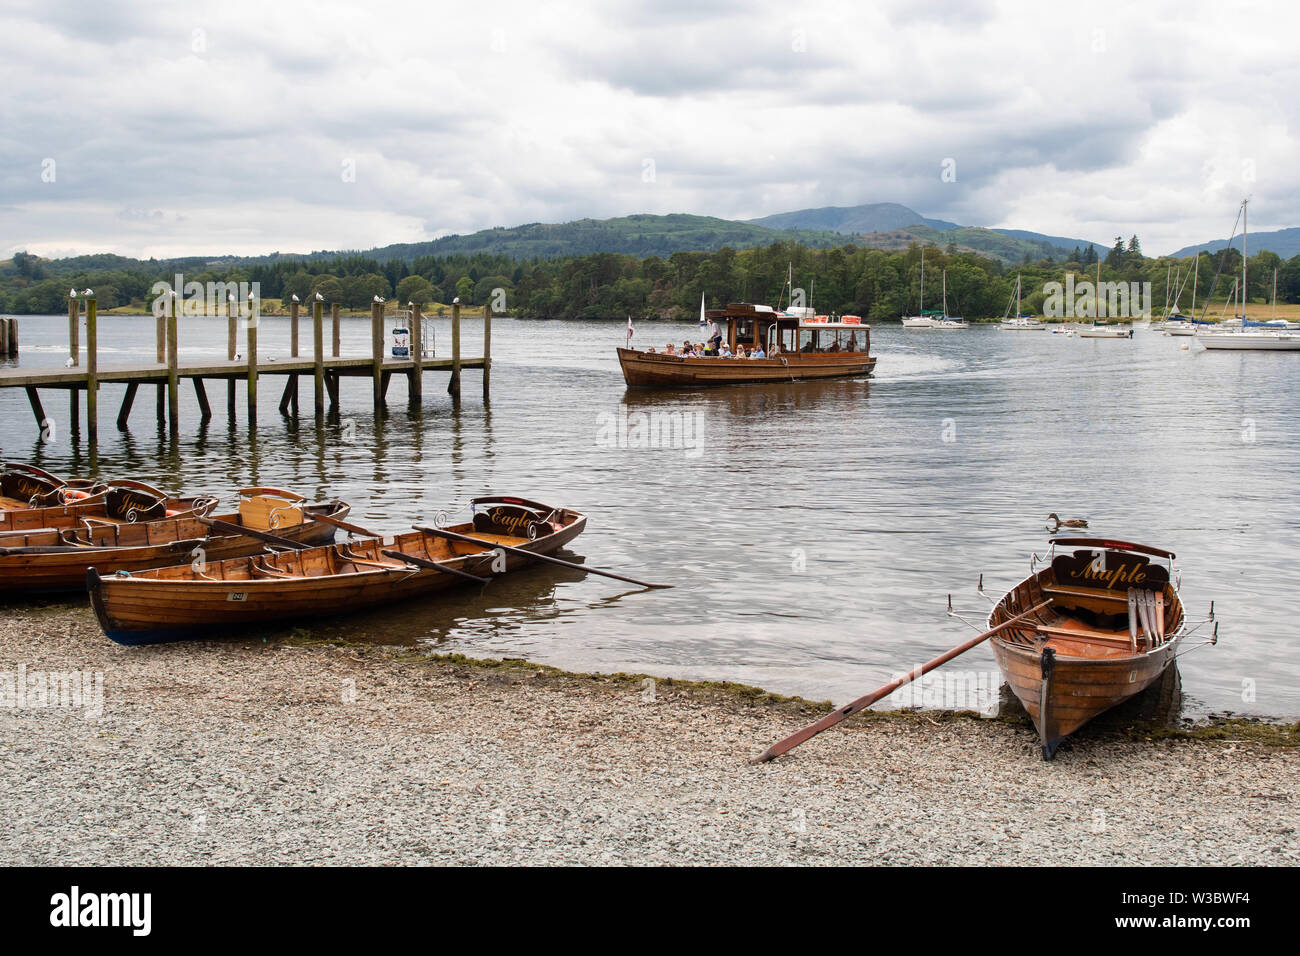 Ambleside, Cumbria, UK. 14th July 2019. UK weather - a cloudy day for visitors enjoying a boat trip on Lake Windermere arriving in Ambleside, Cumbria in the Lake District.  Tomorrow is forecast to be a brighter day Credit: Kay Roxby/Alamy Live News Stock Photo